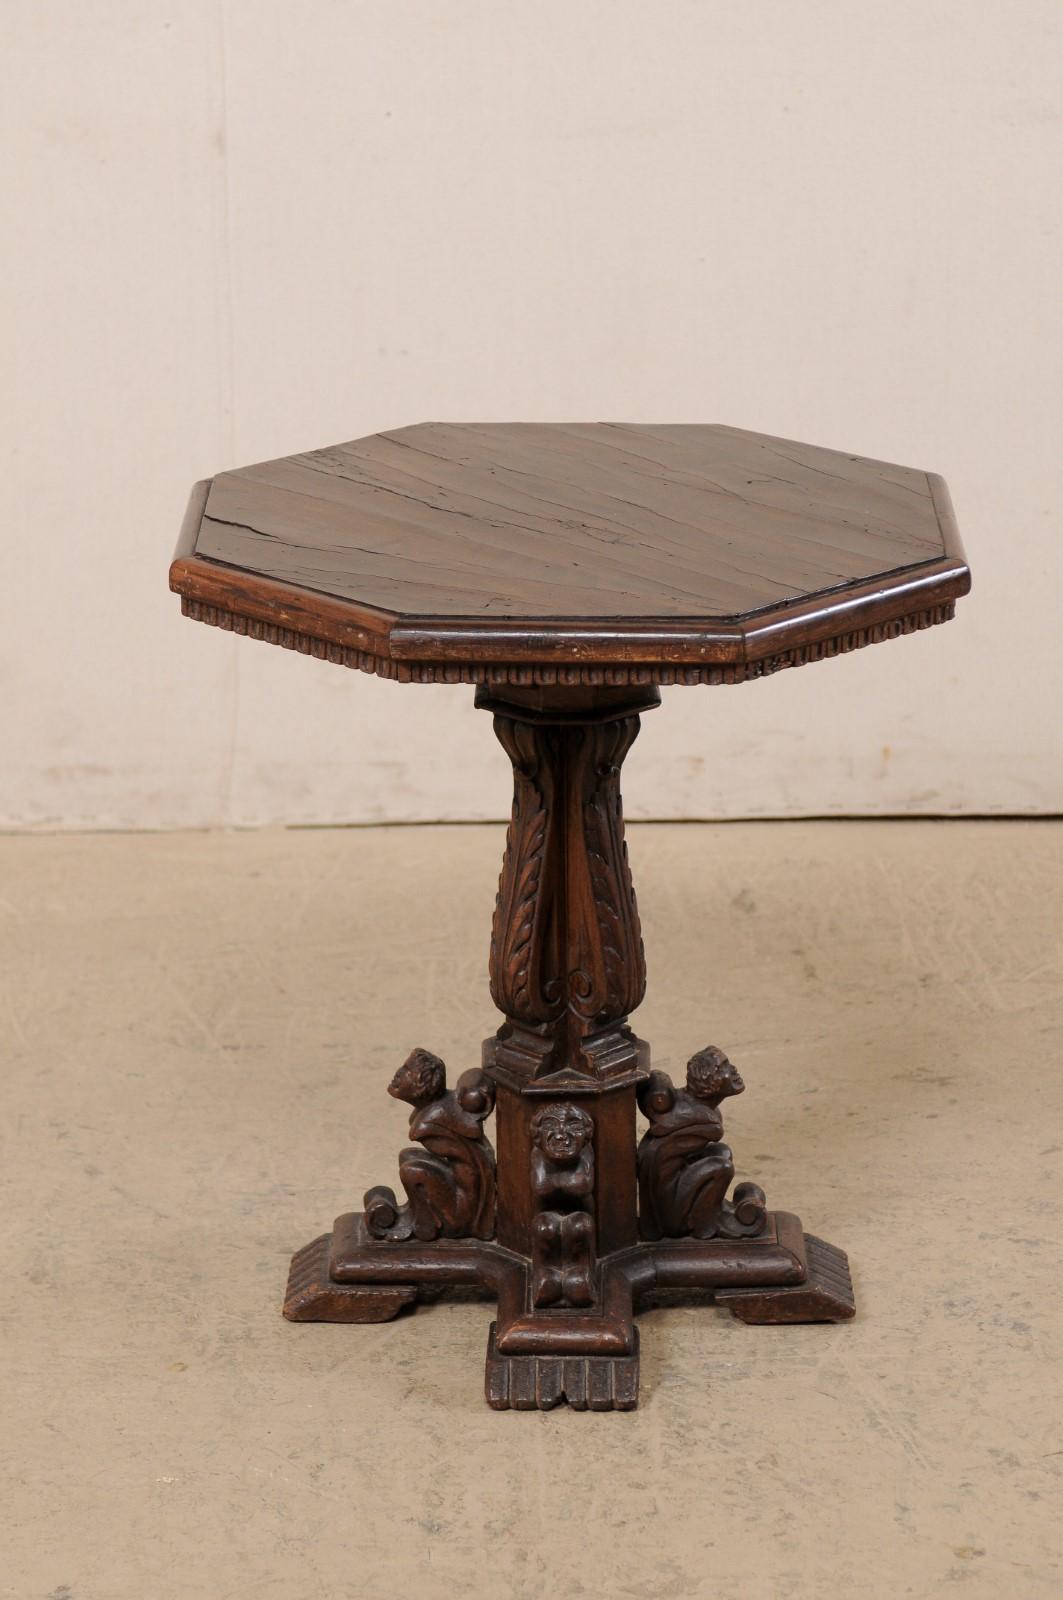 Wood Italian Small Pedestal Table w/Carved Figures & Octagon Top, Early 19th C